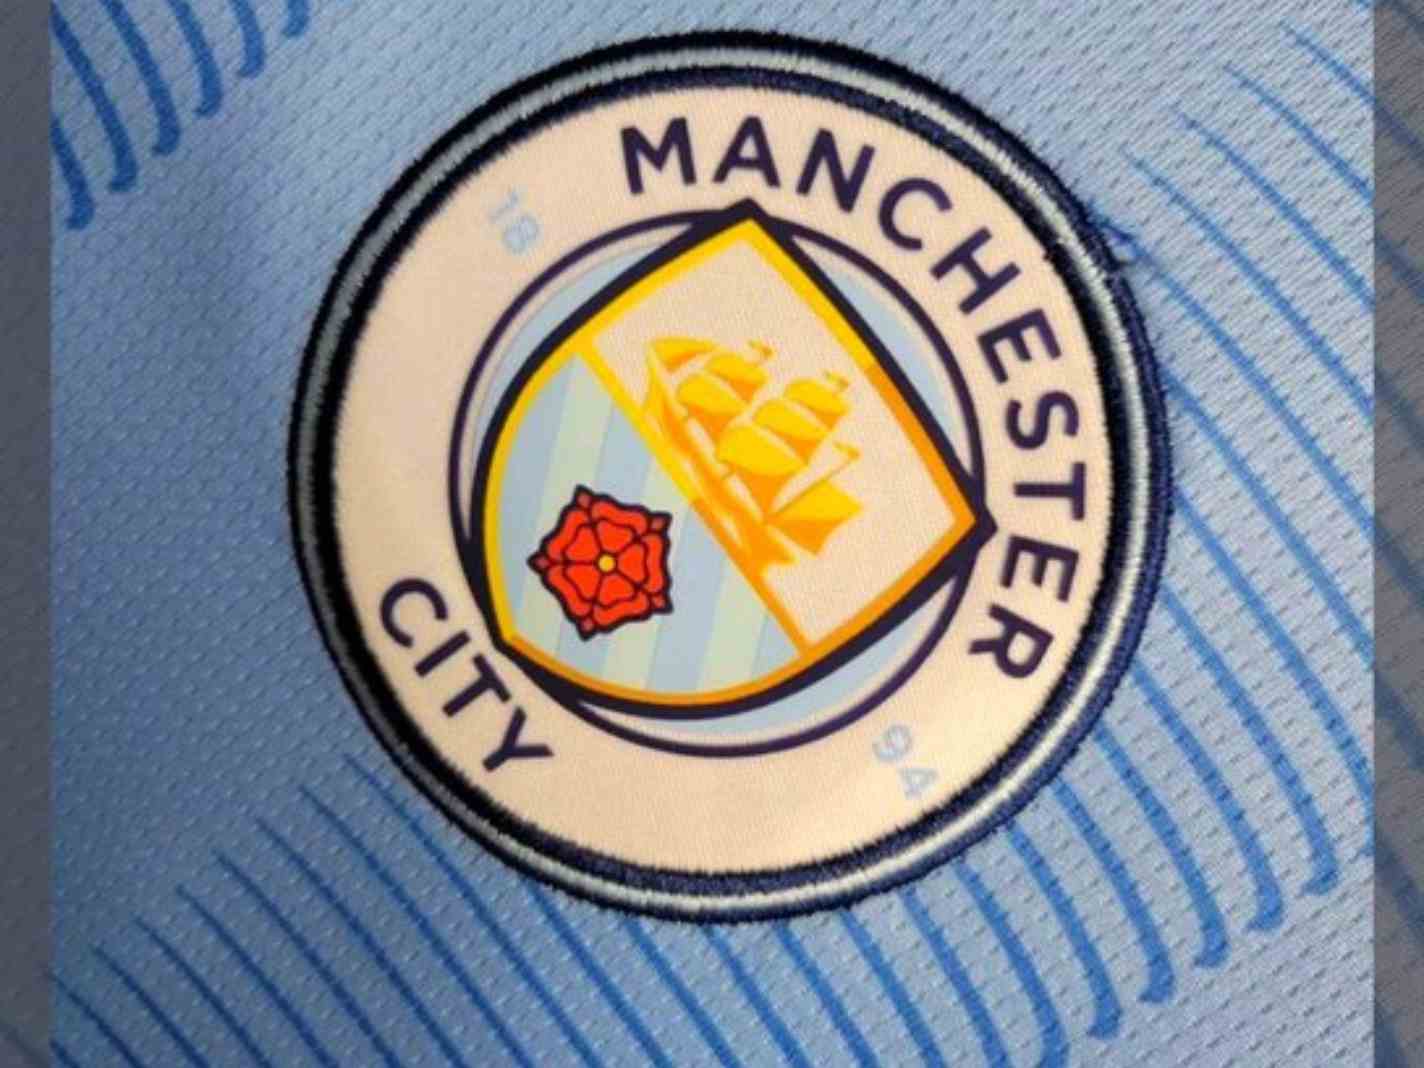 Man City Home and Away Kit for 23/24 Season Leaks Online